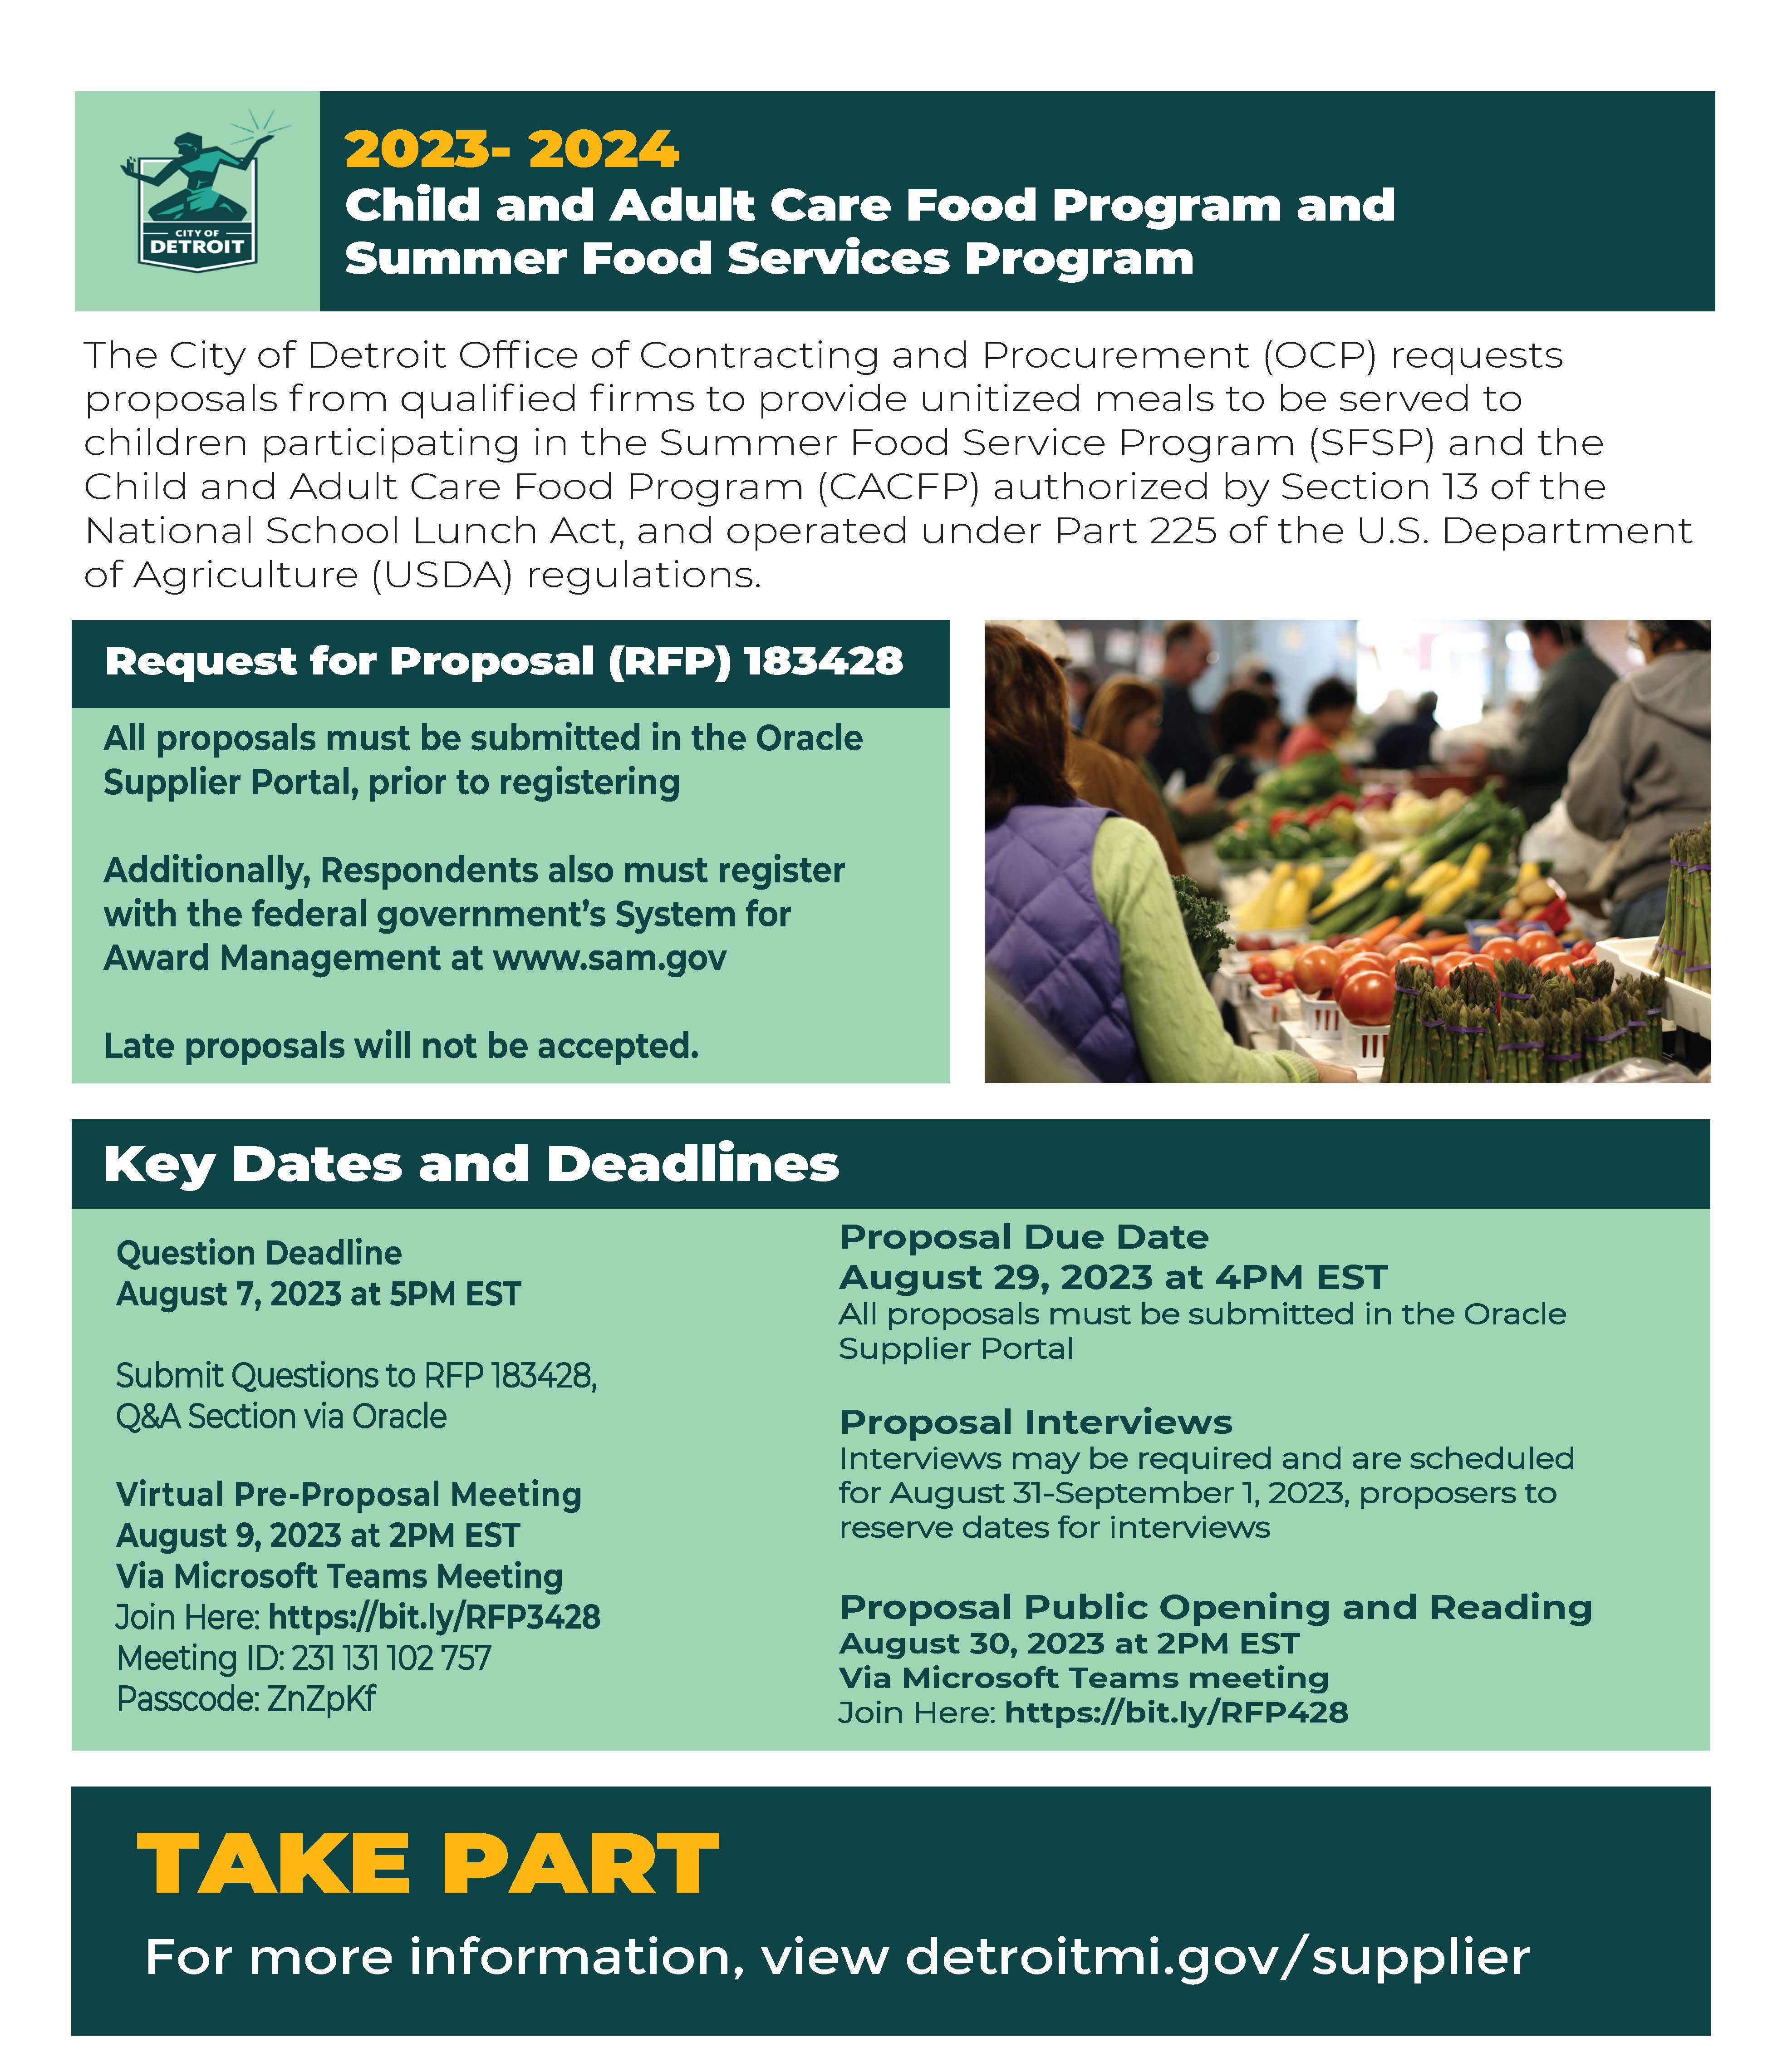 TAKE PART: 2023-2024 CHILD AND ADULT CARE FOOD PROGRAM AND SUMMER FOOD SERVICES PROGRAM